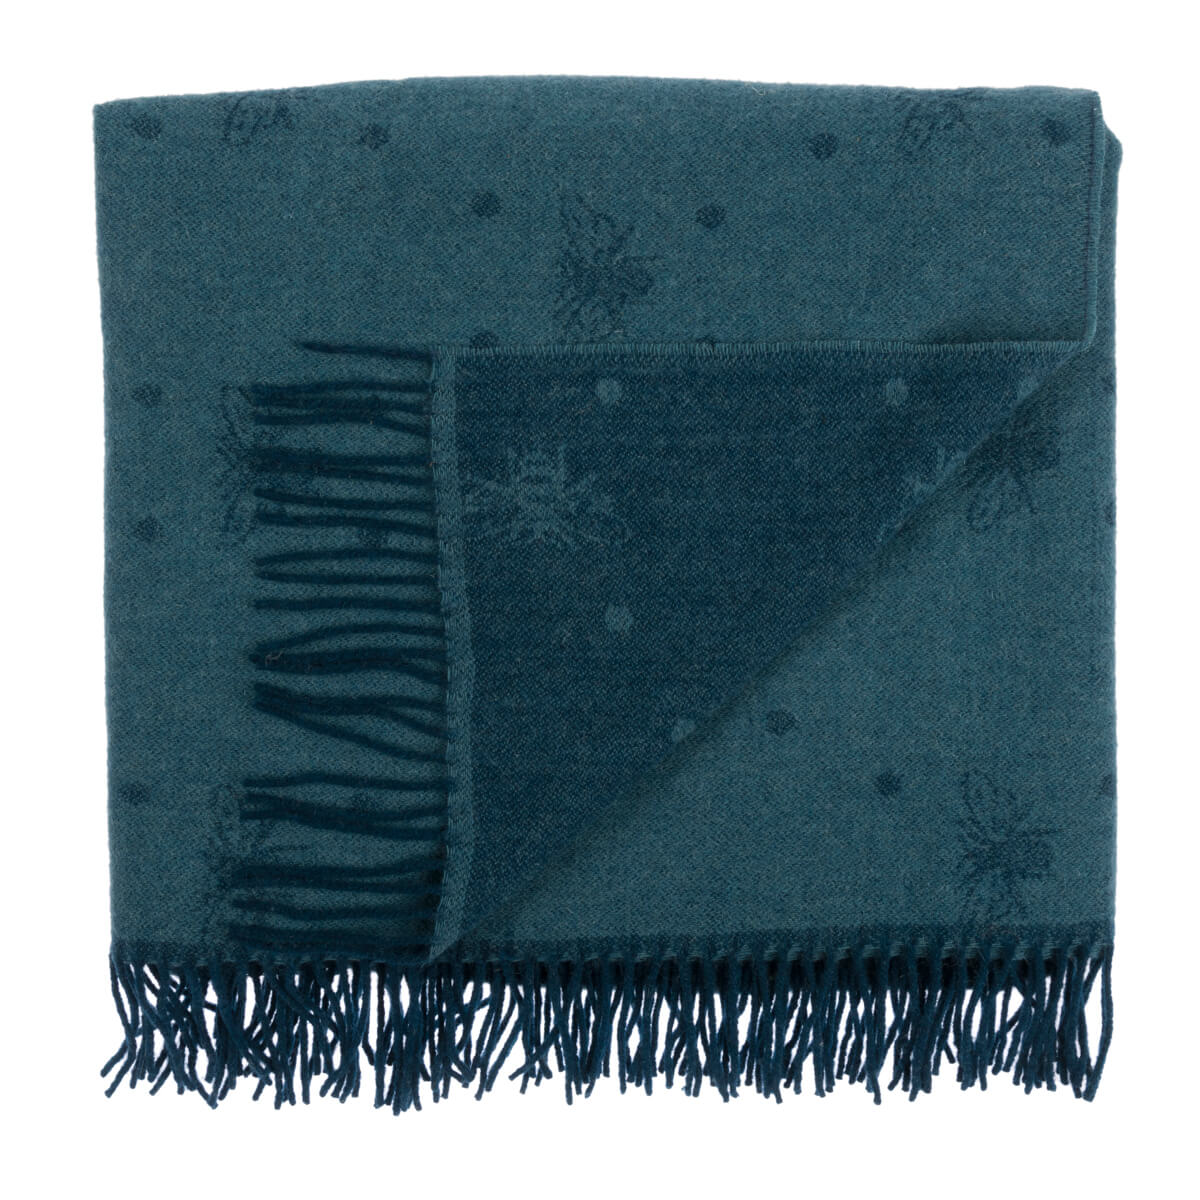 Bees Wool Knitted Throw by Sophie Allport